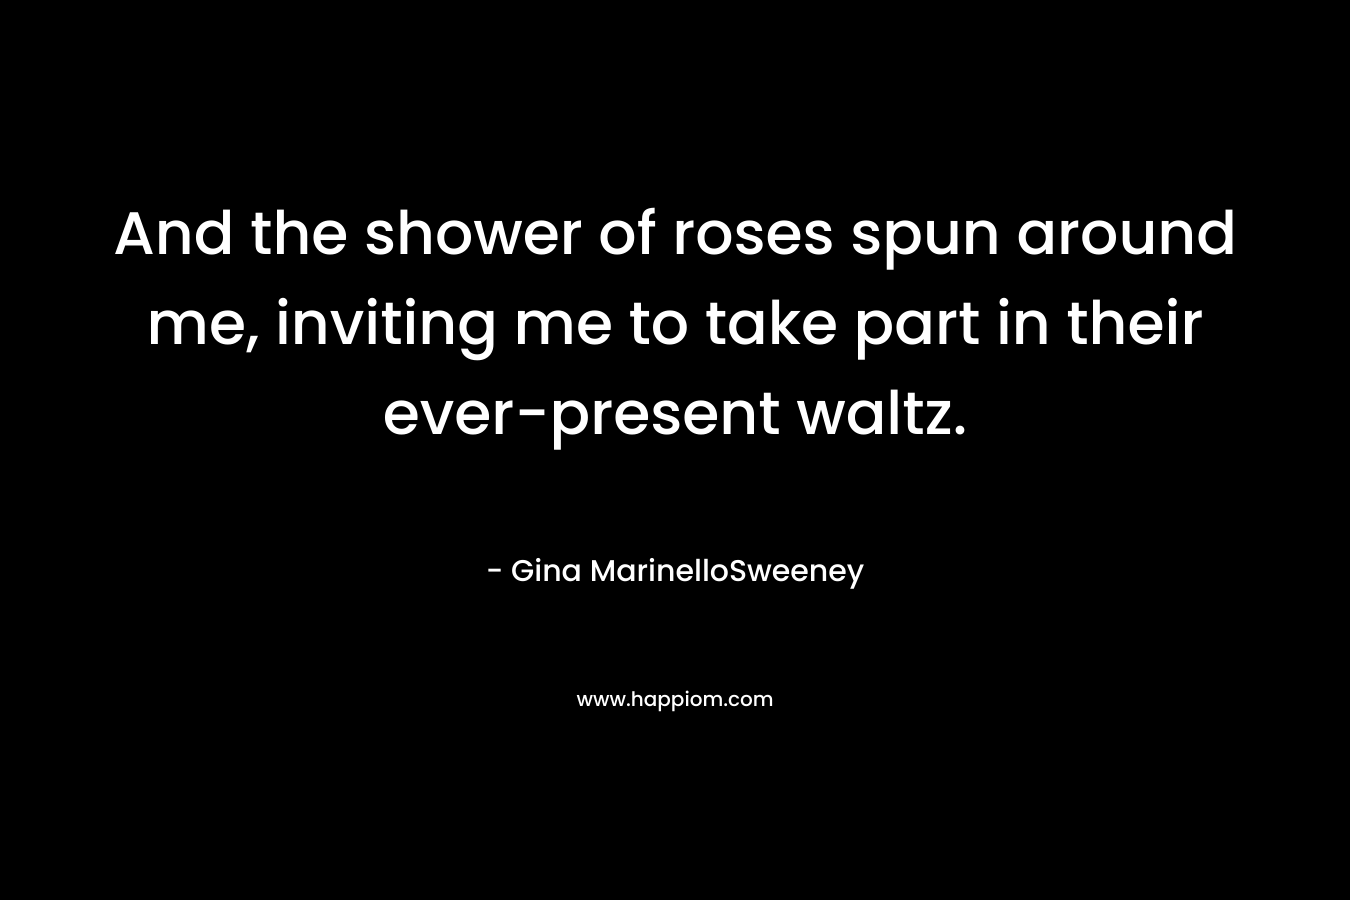 And the shower of roses spun around me, inviting me to take part in their ever-present waltz. – Gina MarinelloSweeney